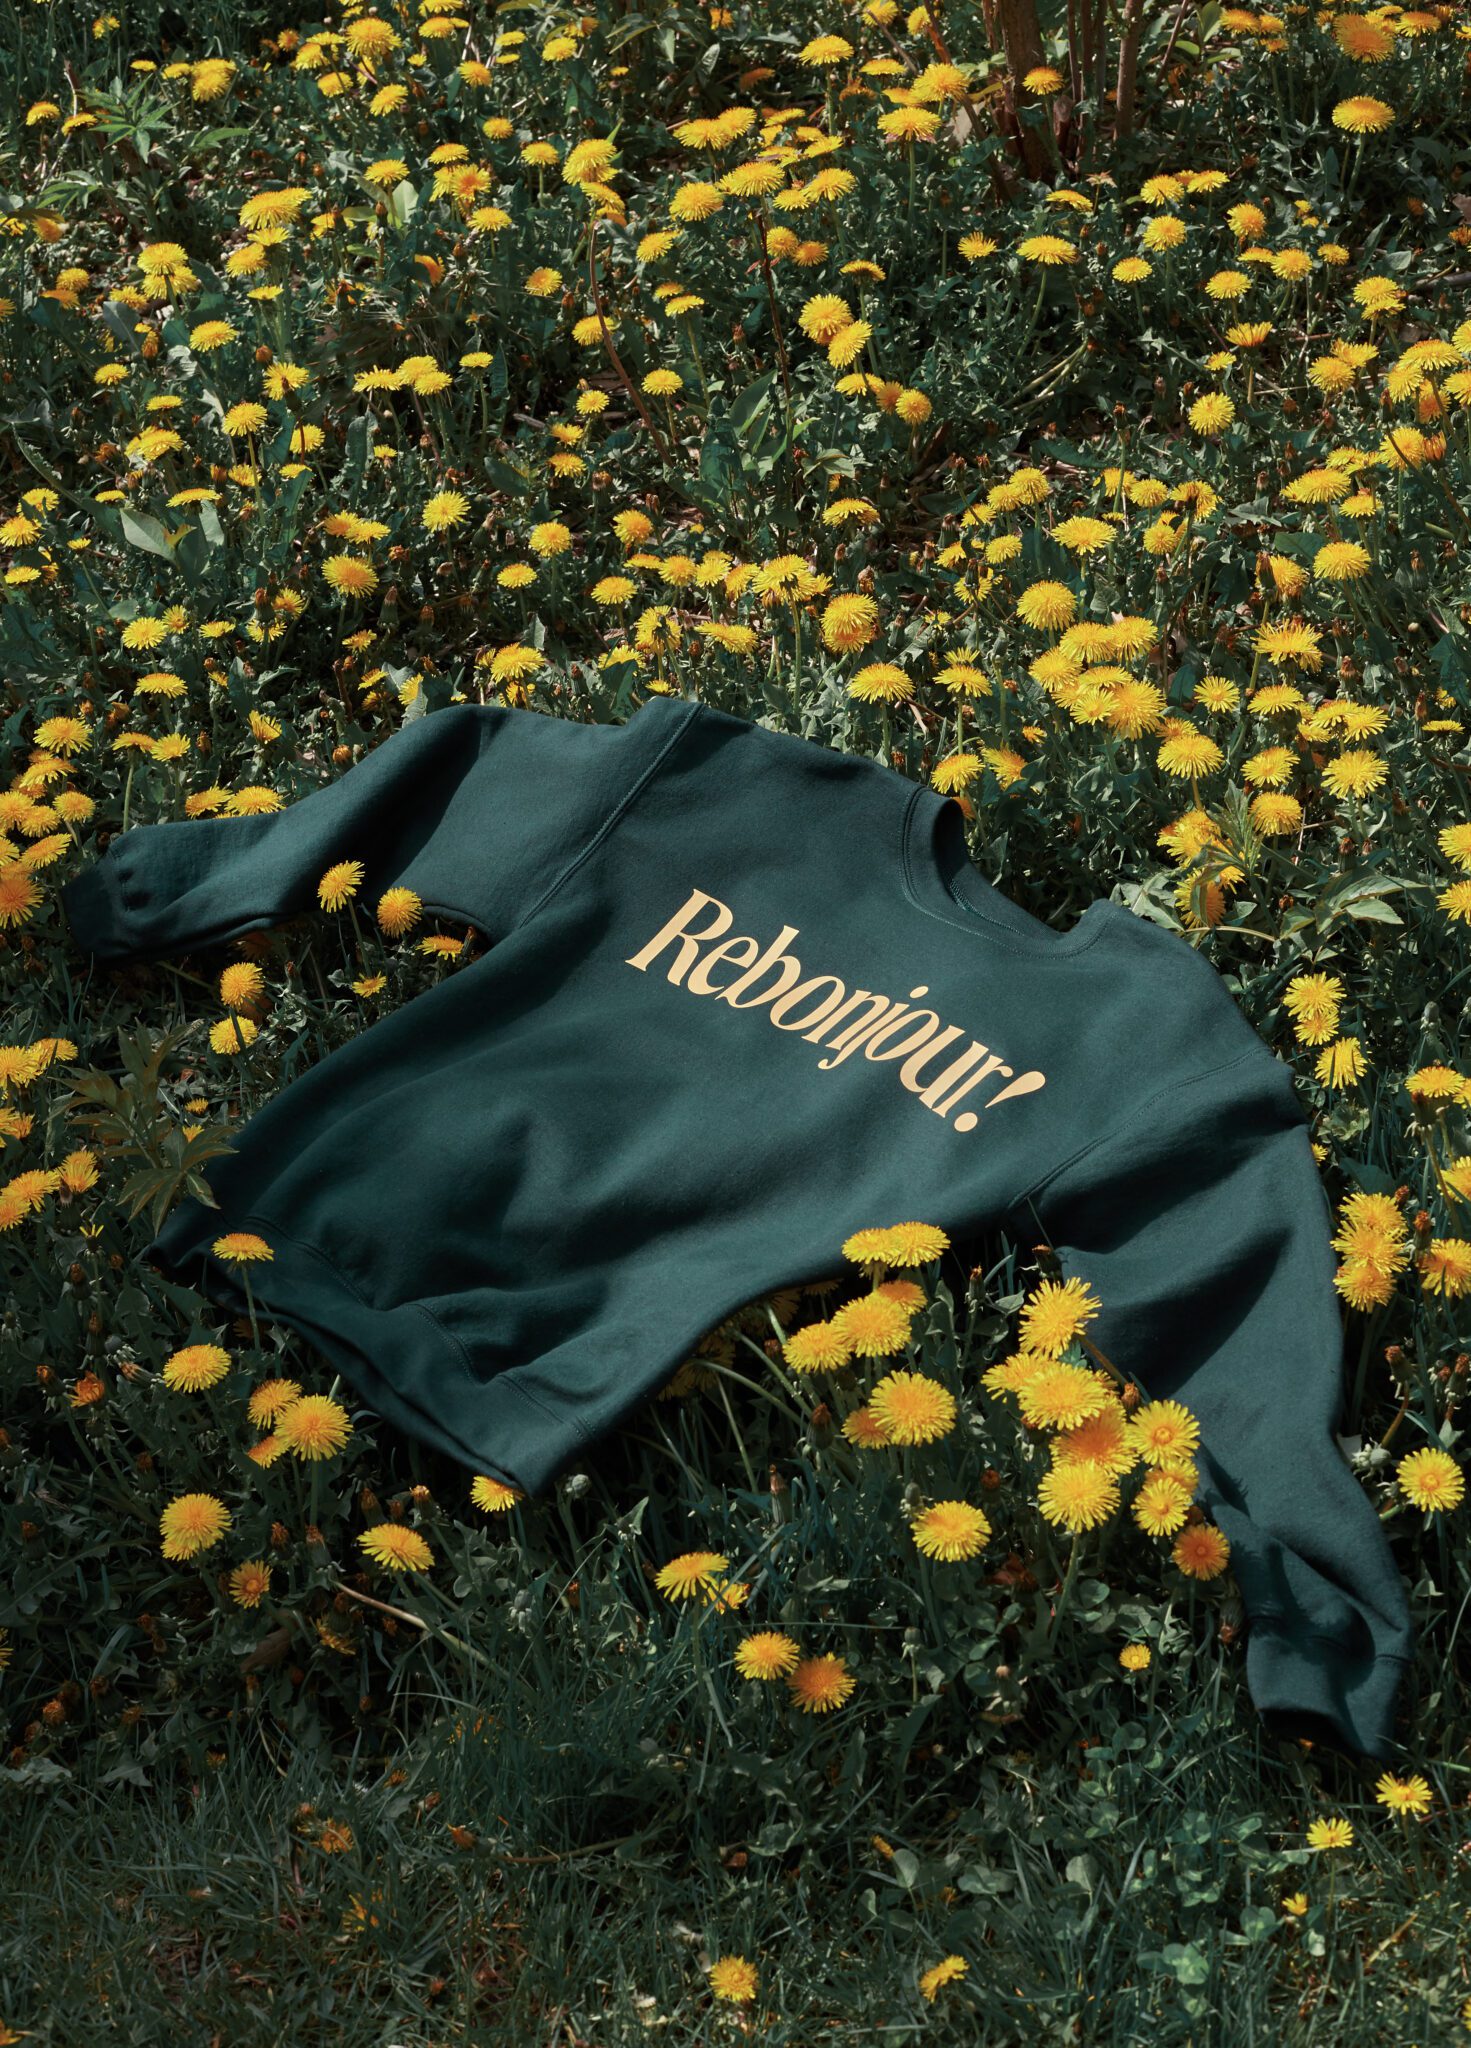 FEQ green sweater that says Rebonjour in yellow font. The sweater is in a field of dandelions.